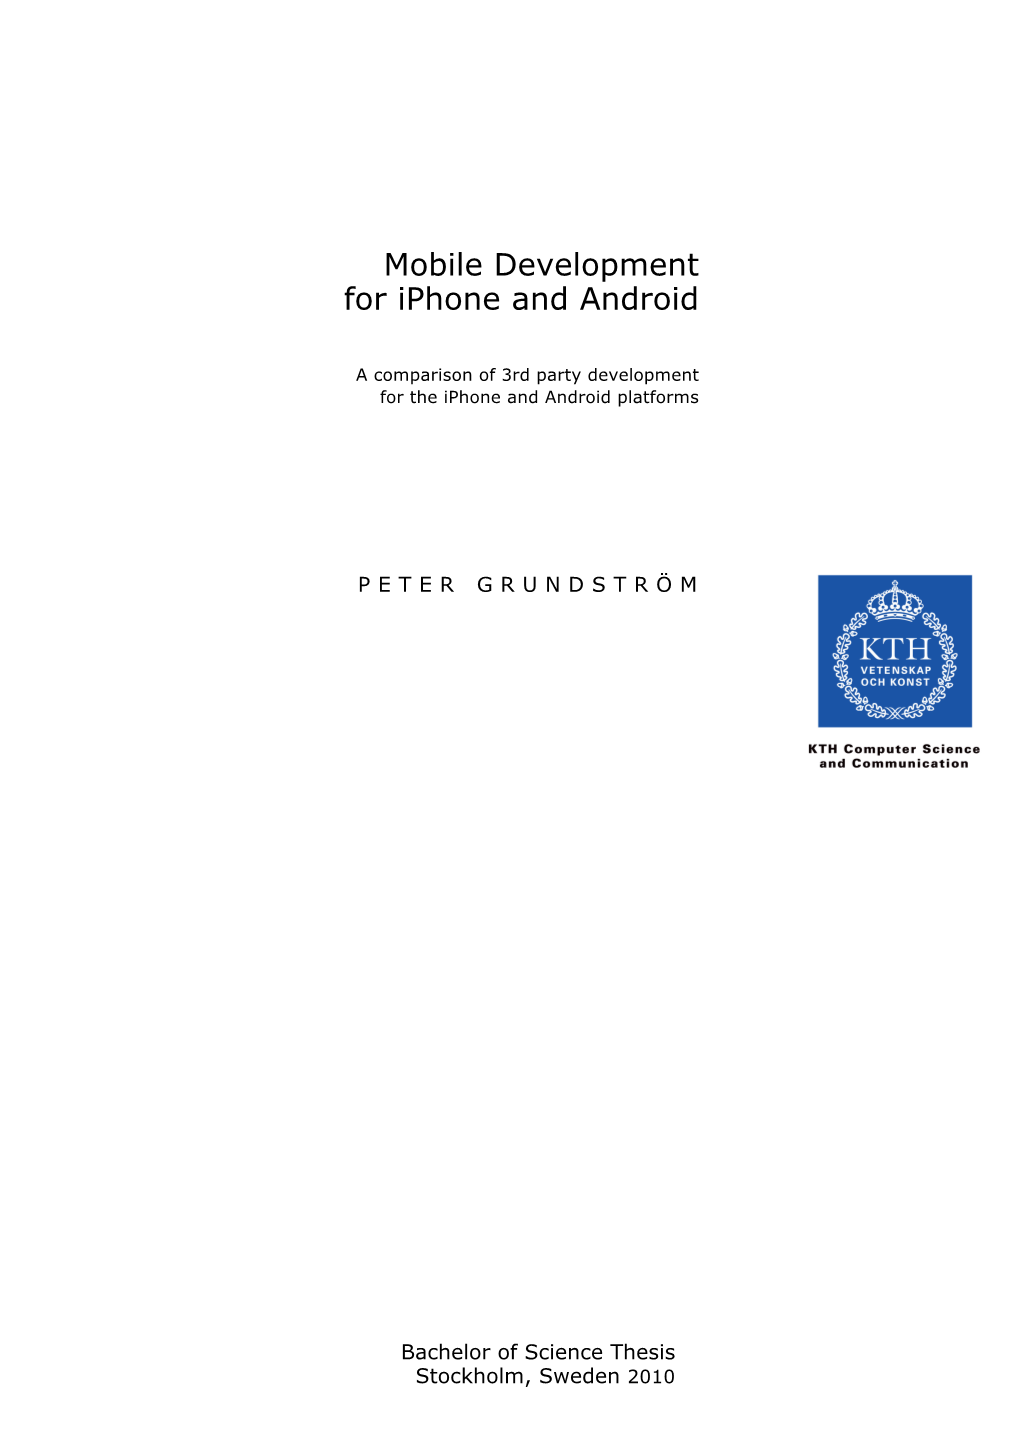 Mobile Development for Iphone and Android